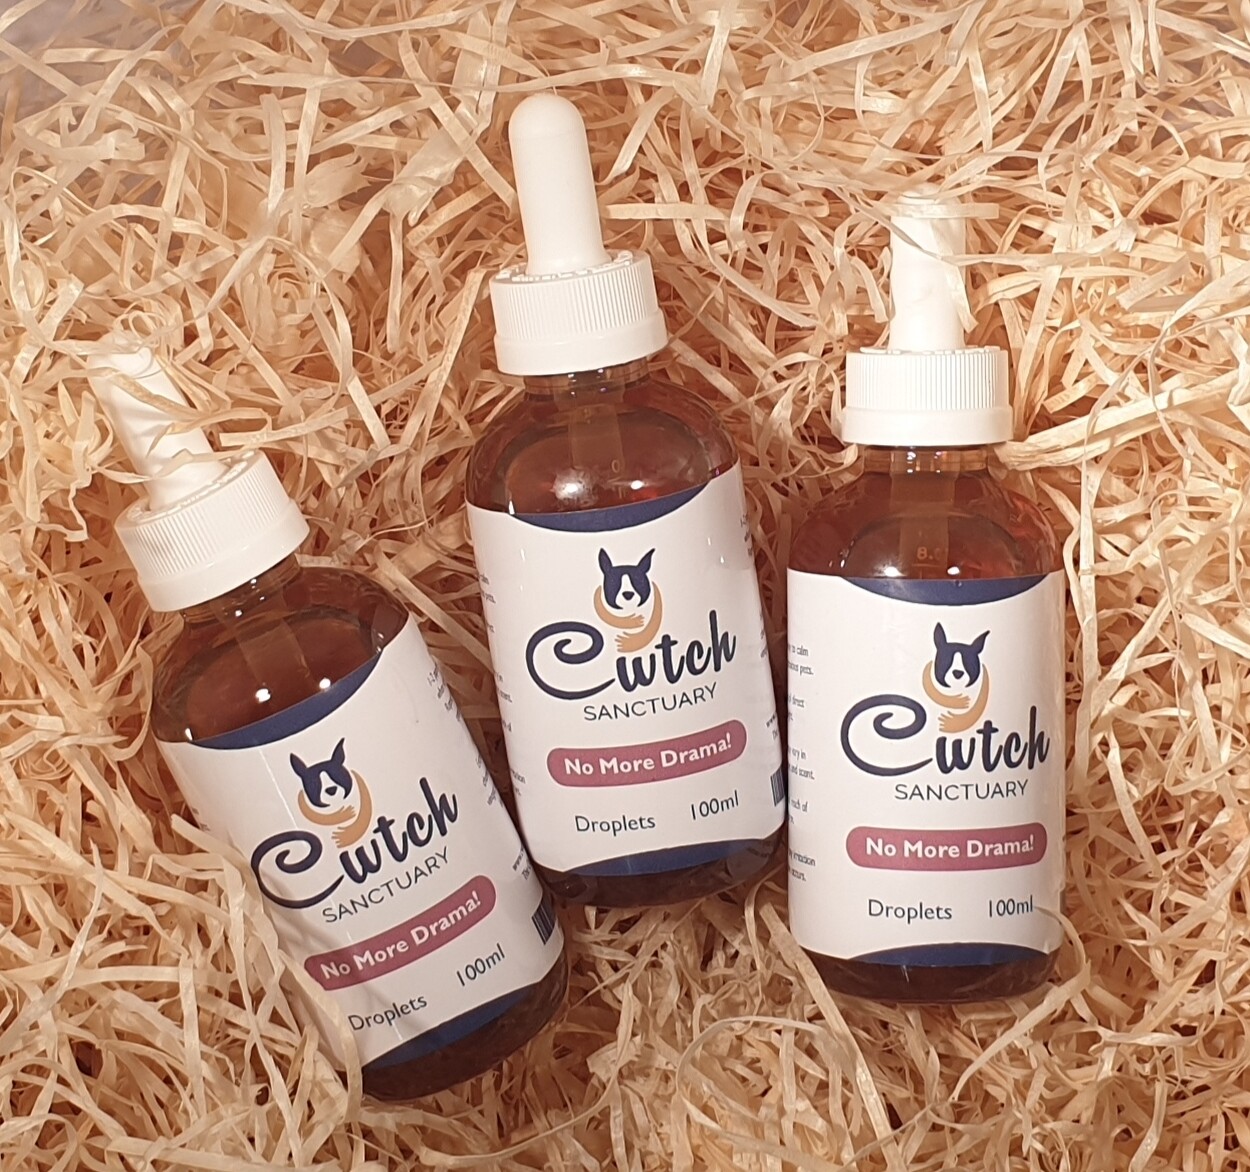 Cwtch Sanctuary No More Drama! Droplets (100ml) *Calmer / Stress / Anxiety Relief*